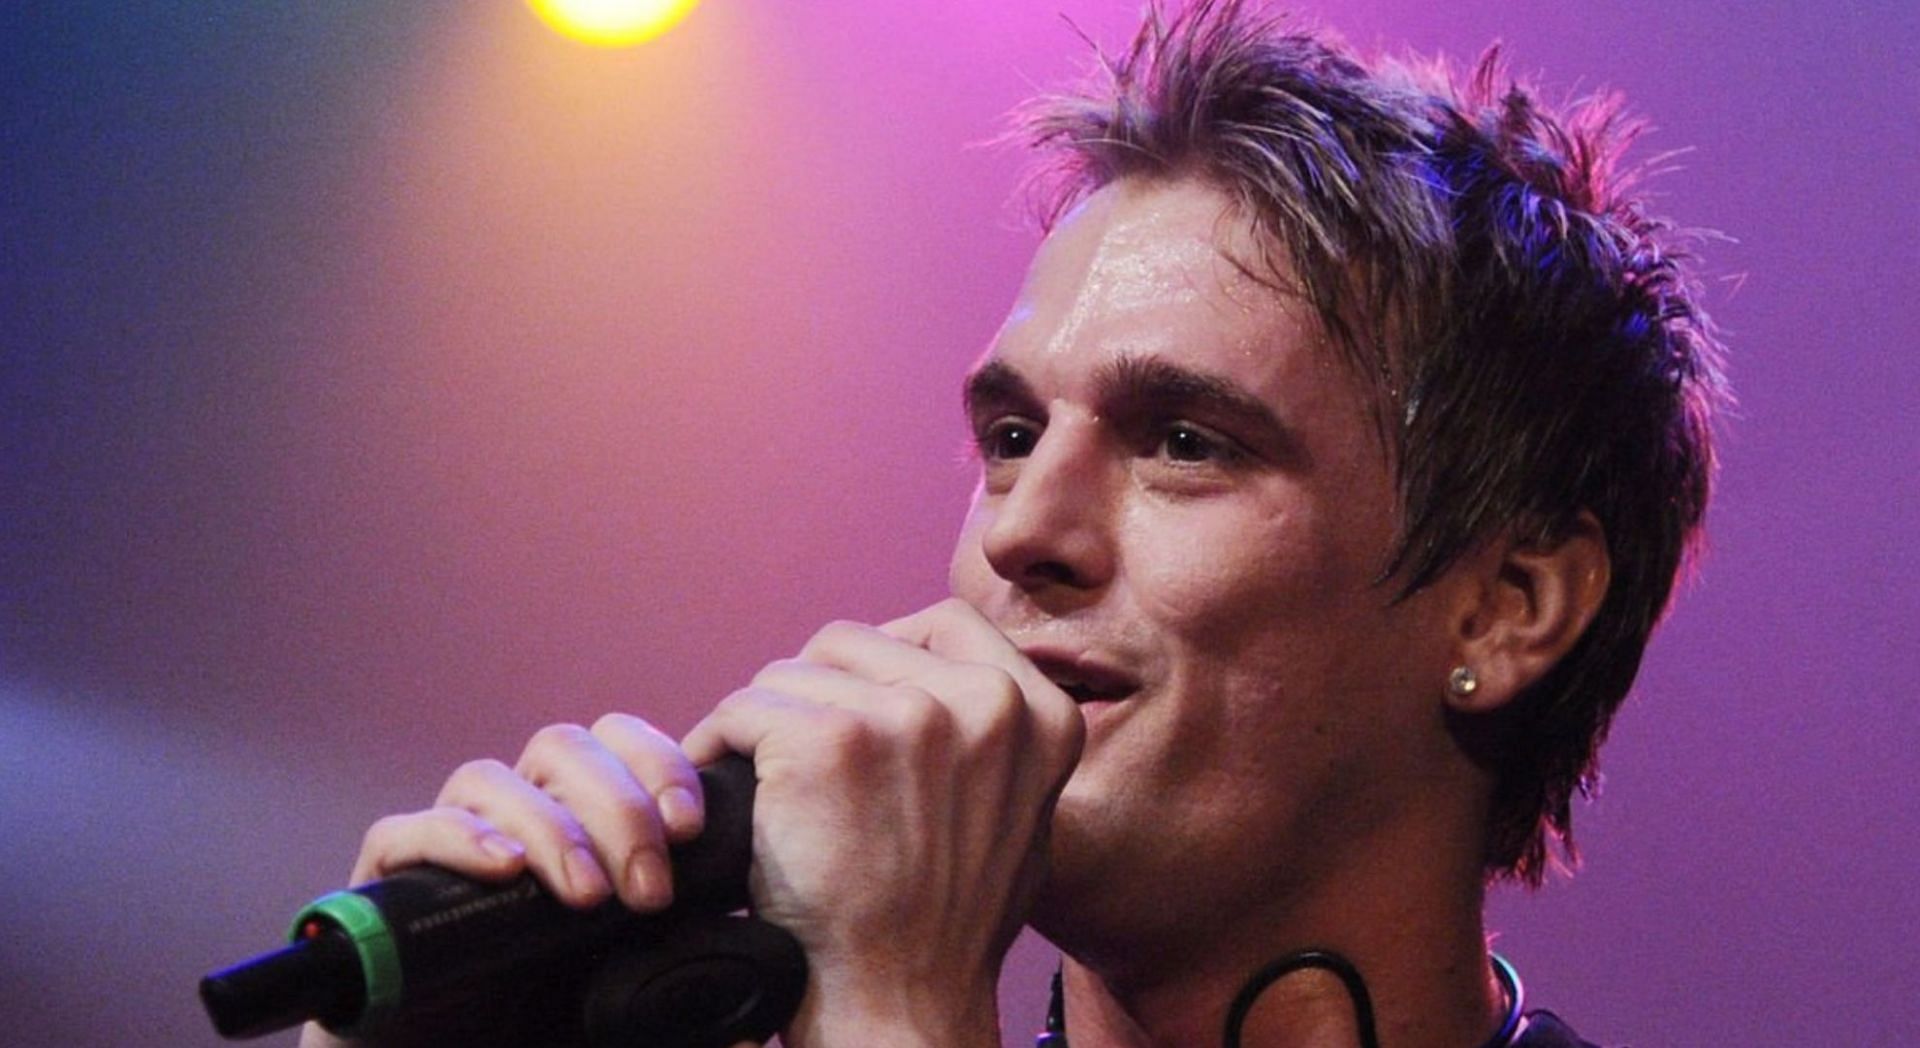 Singer Aaron Carter tragically passed away at the age of 34 (Image via Getty Images)